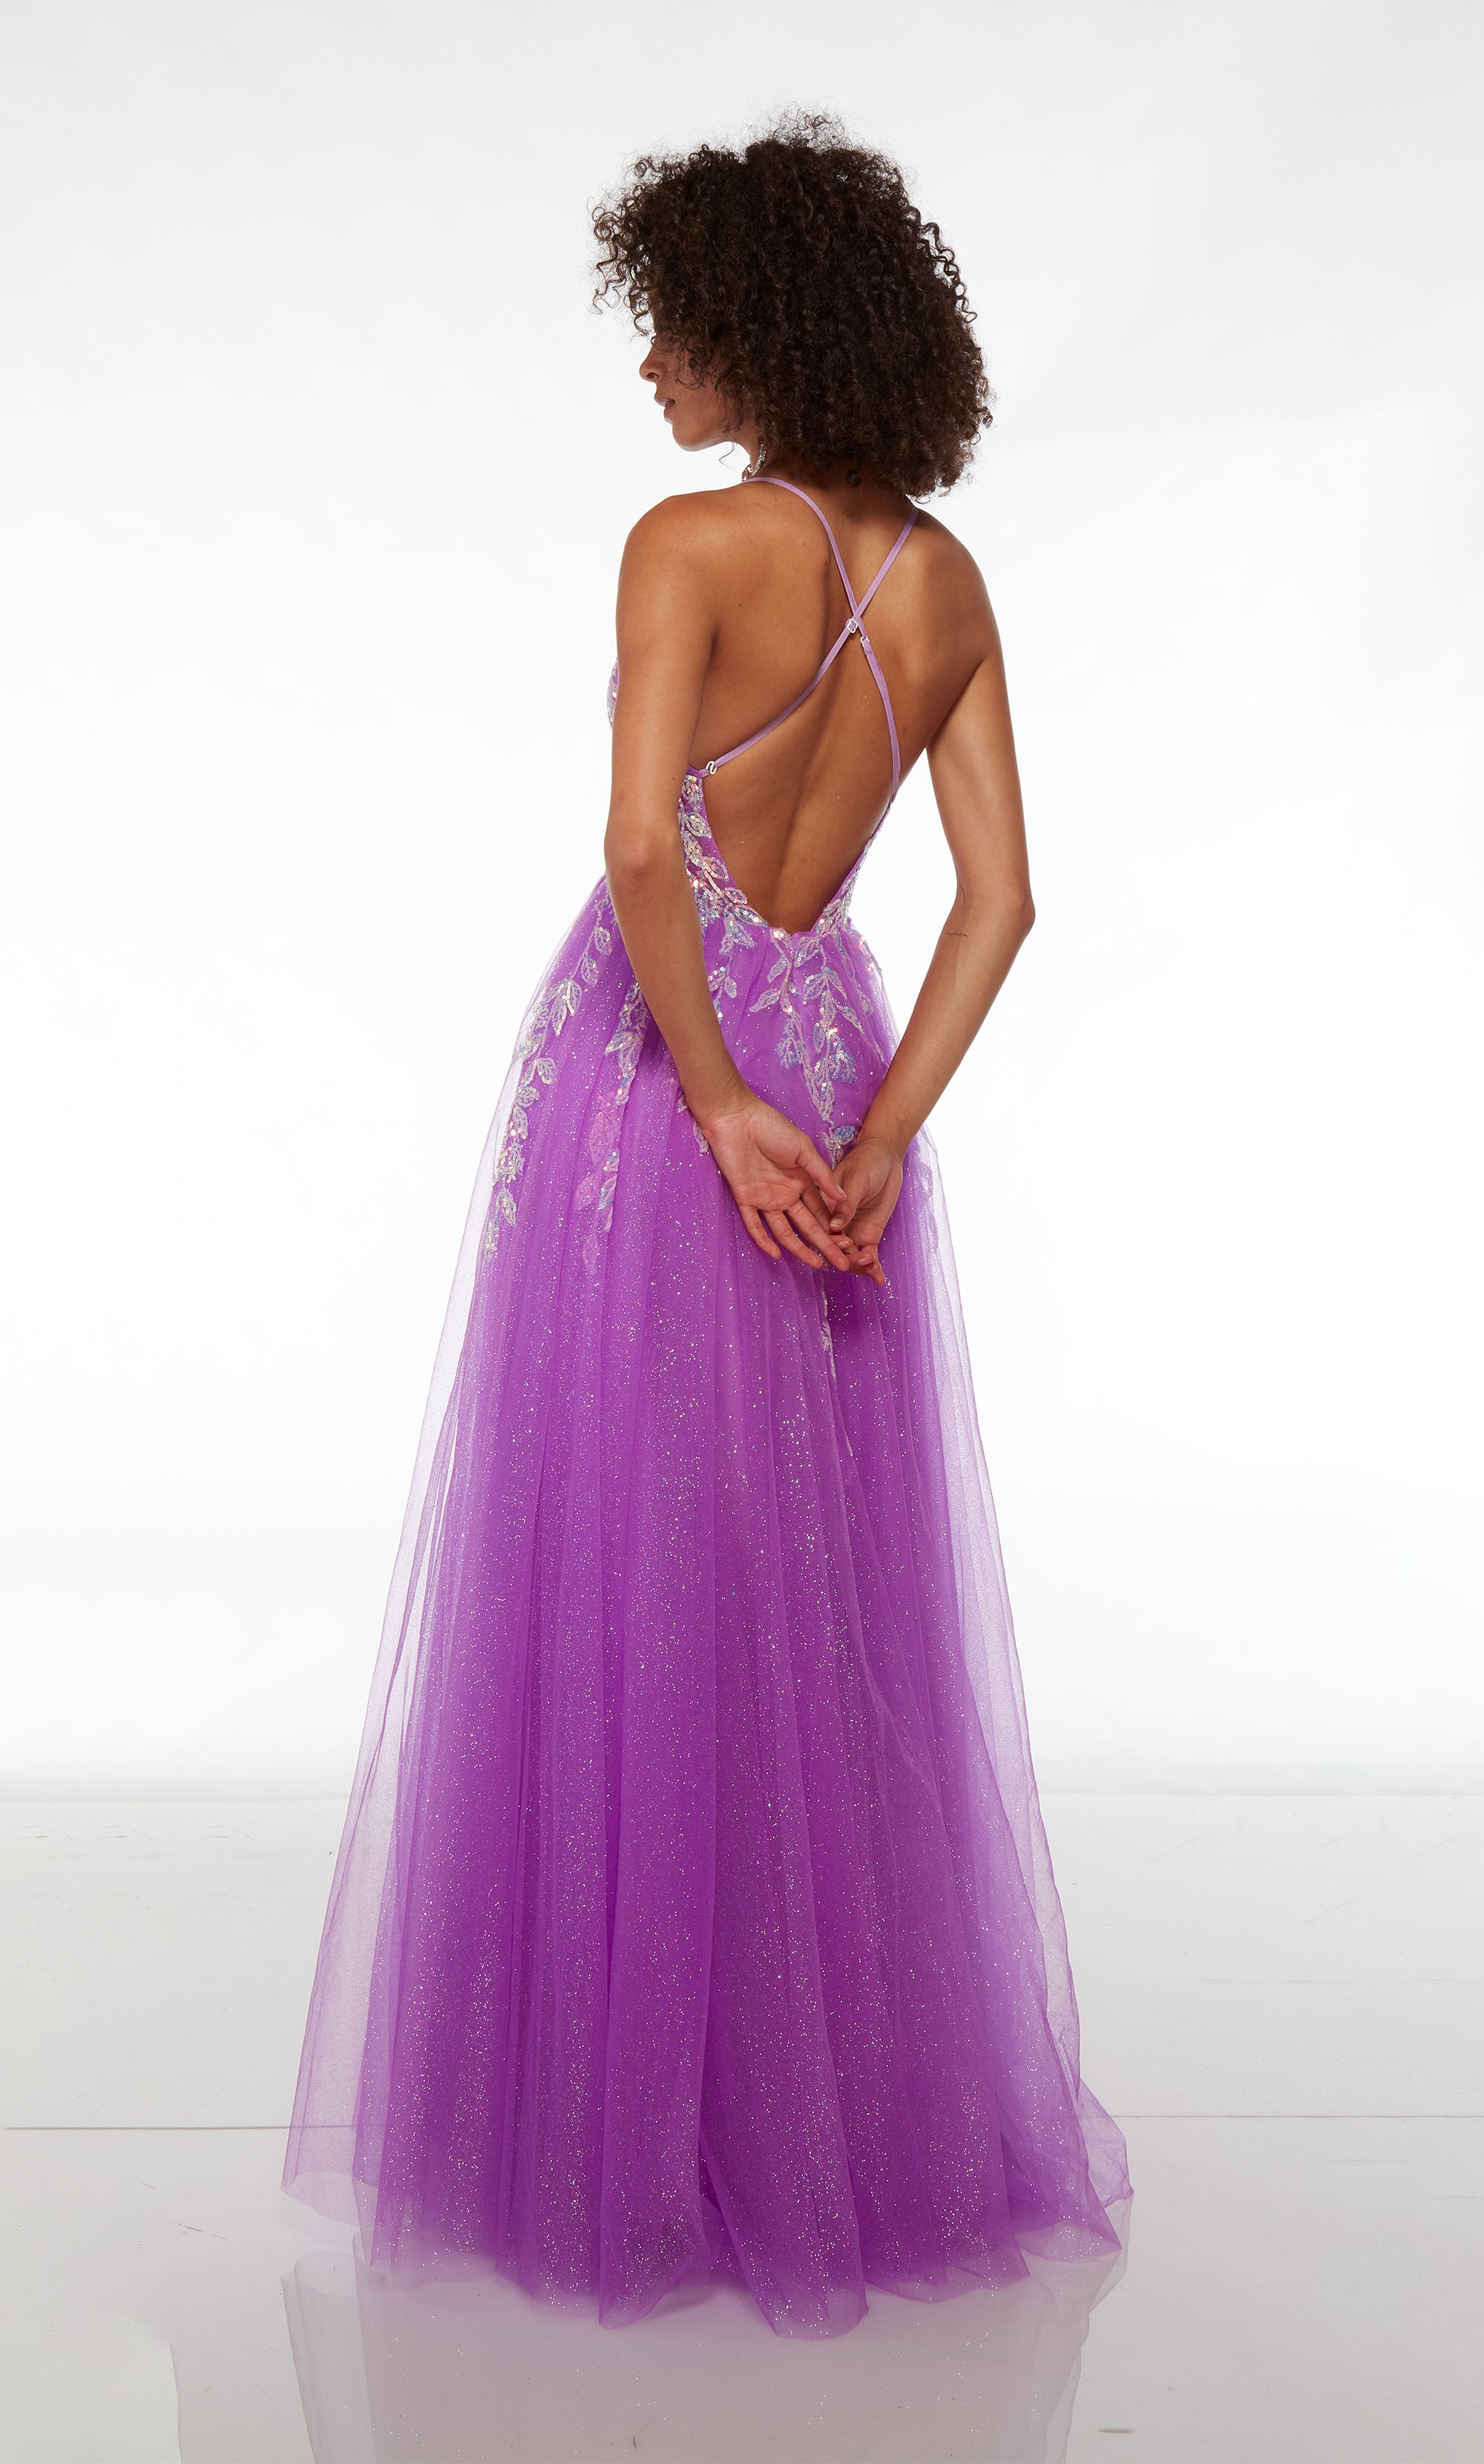 Purple prom dress: V neckline, sheer top with floral lace, high side slit, crisscross open back, in stunning glitter tulle fabric.